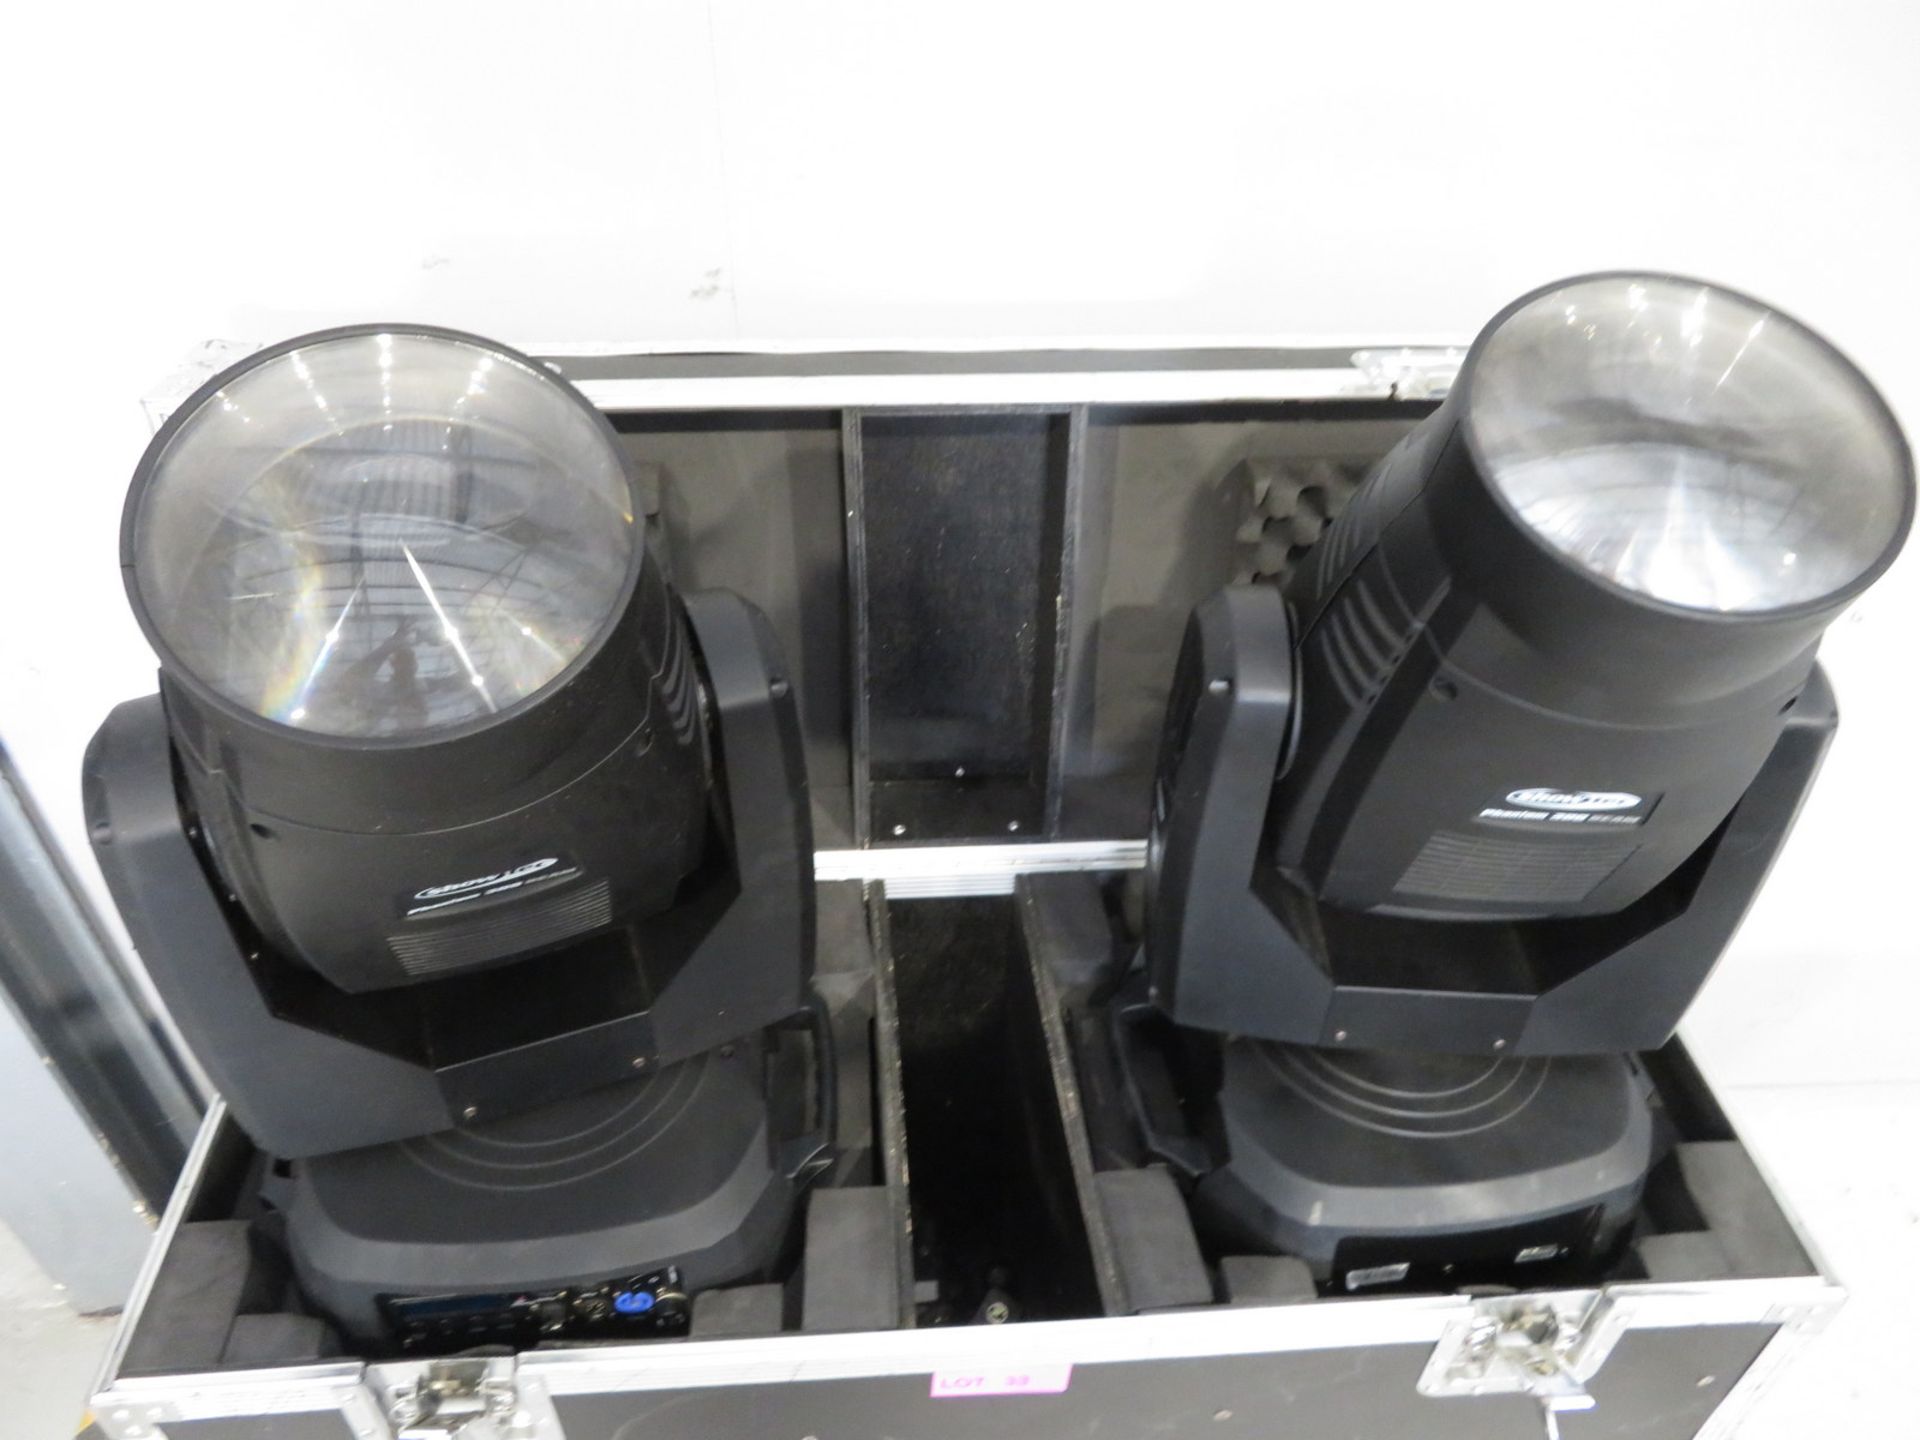 Pair of Showtec Phantom 300 Beams in flightcase. Includes hanging clamps and safety bonds. - Image 3 of 7